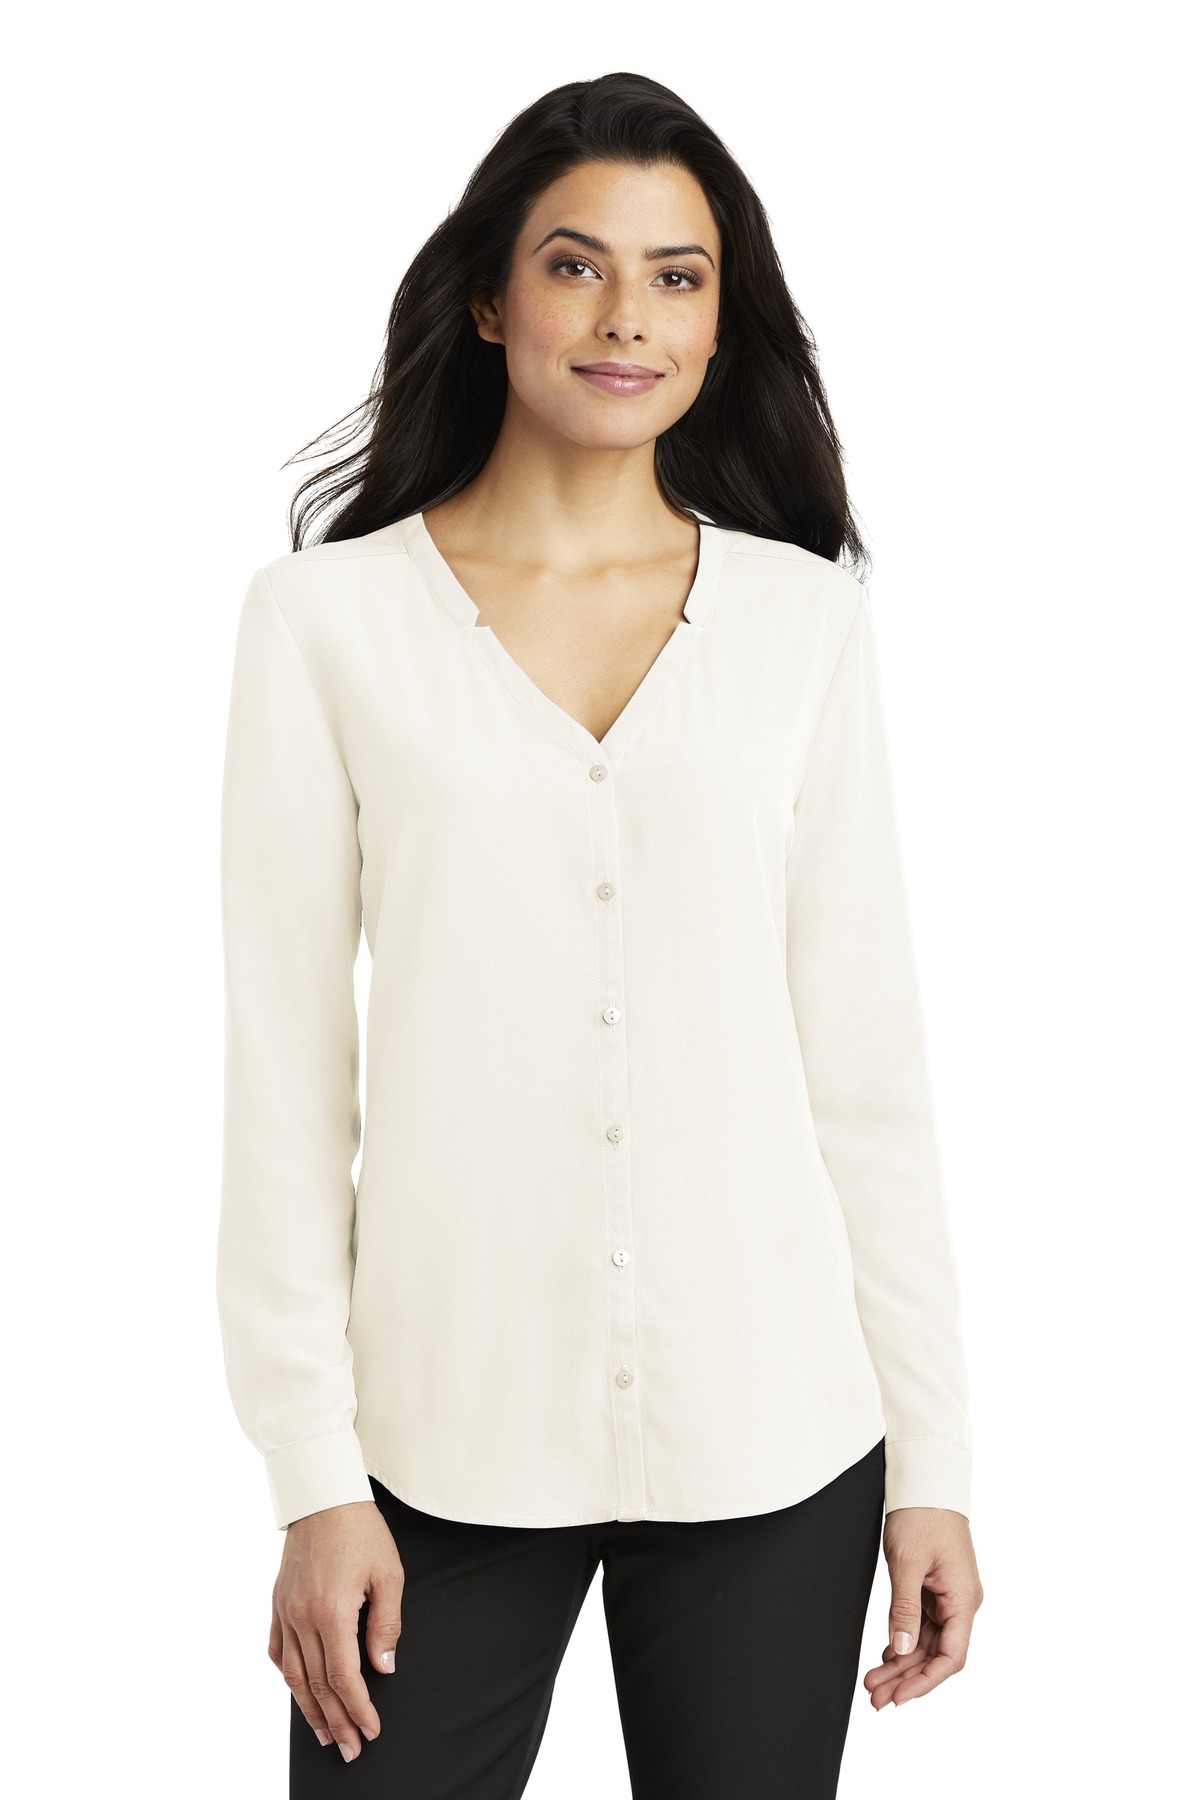 Port Authority Women's Long Sleeve Button-Front Blouse. LW700 - image 1 of 4